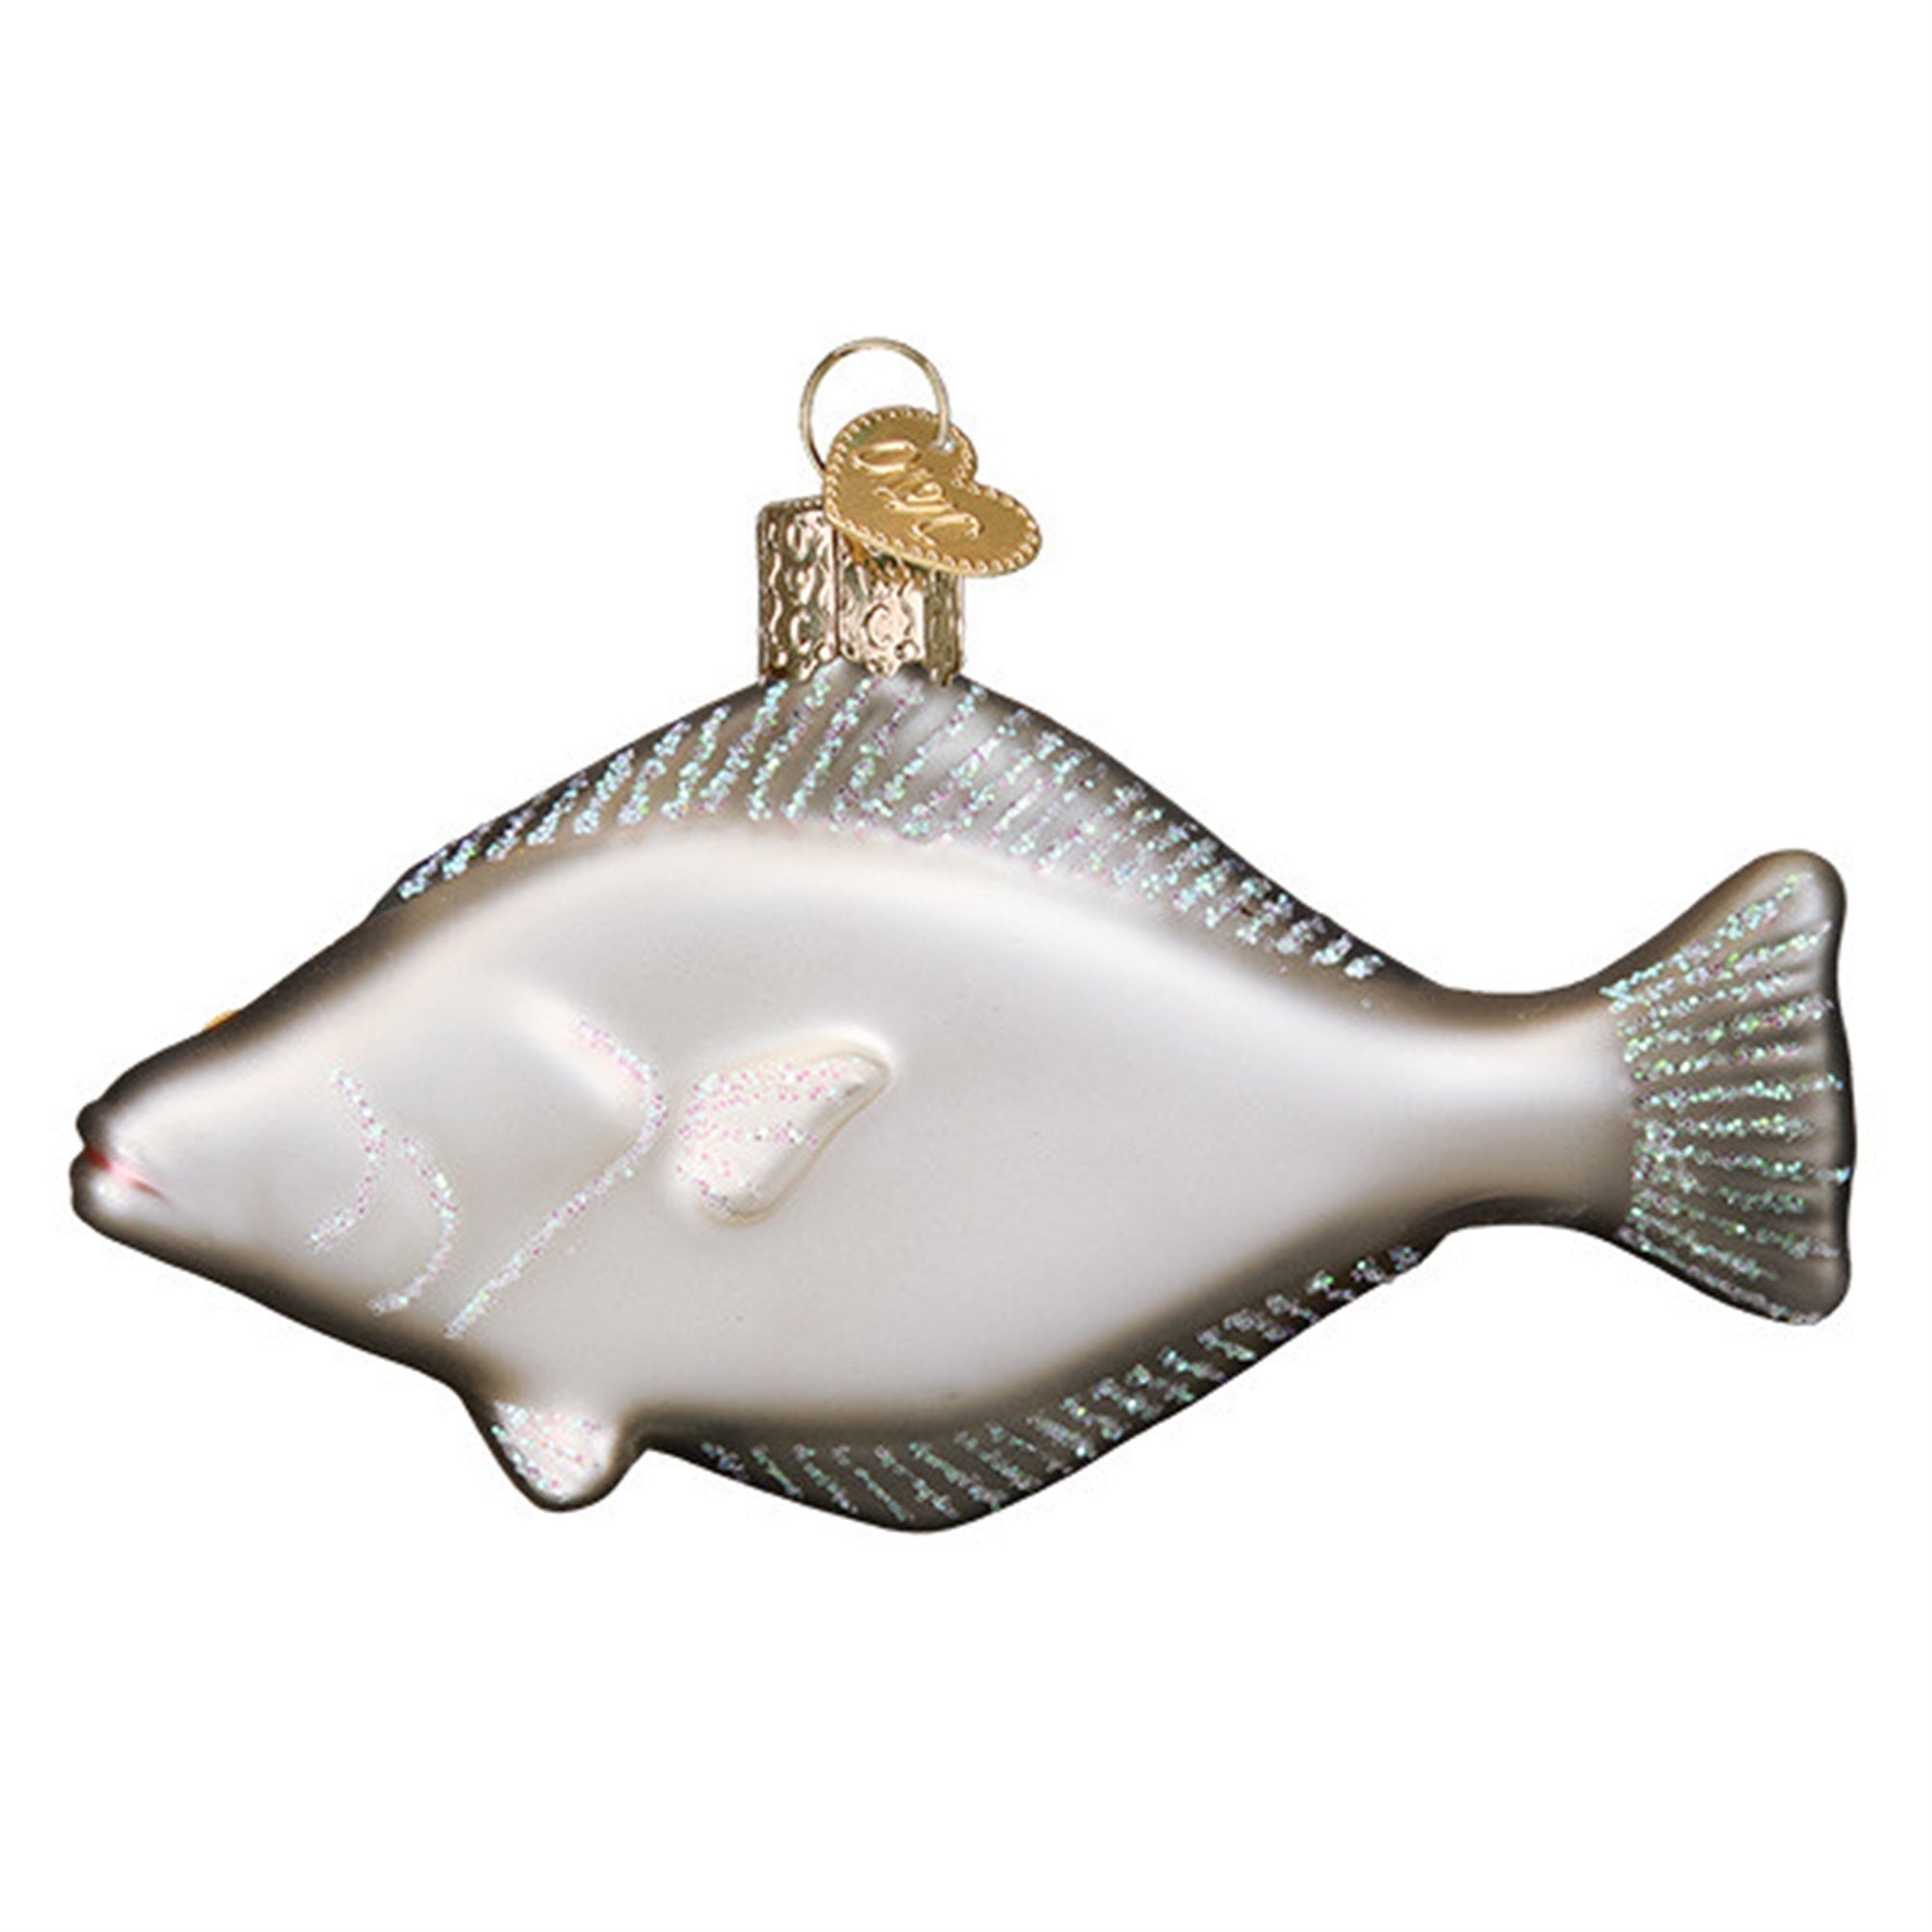 Old World Christmas Pacific Halibut Glass Blown Ornament